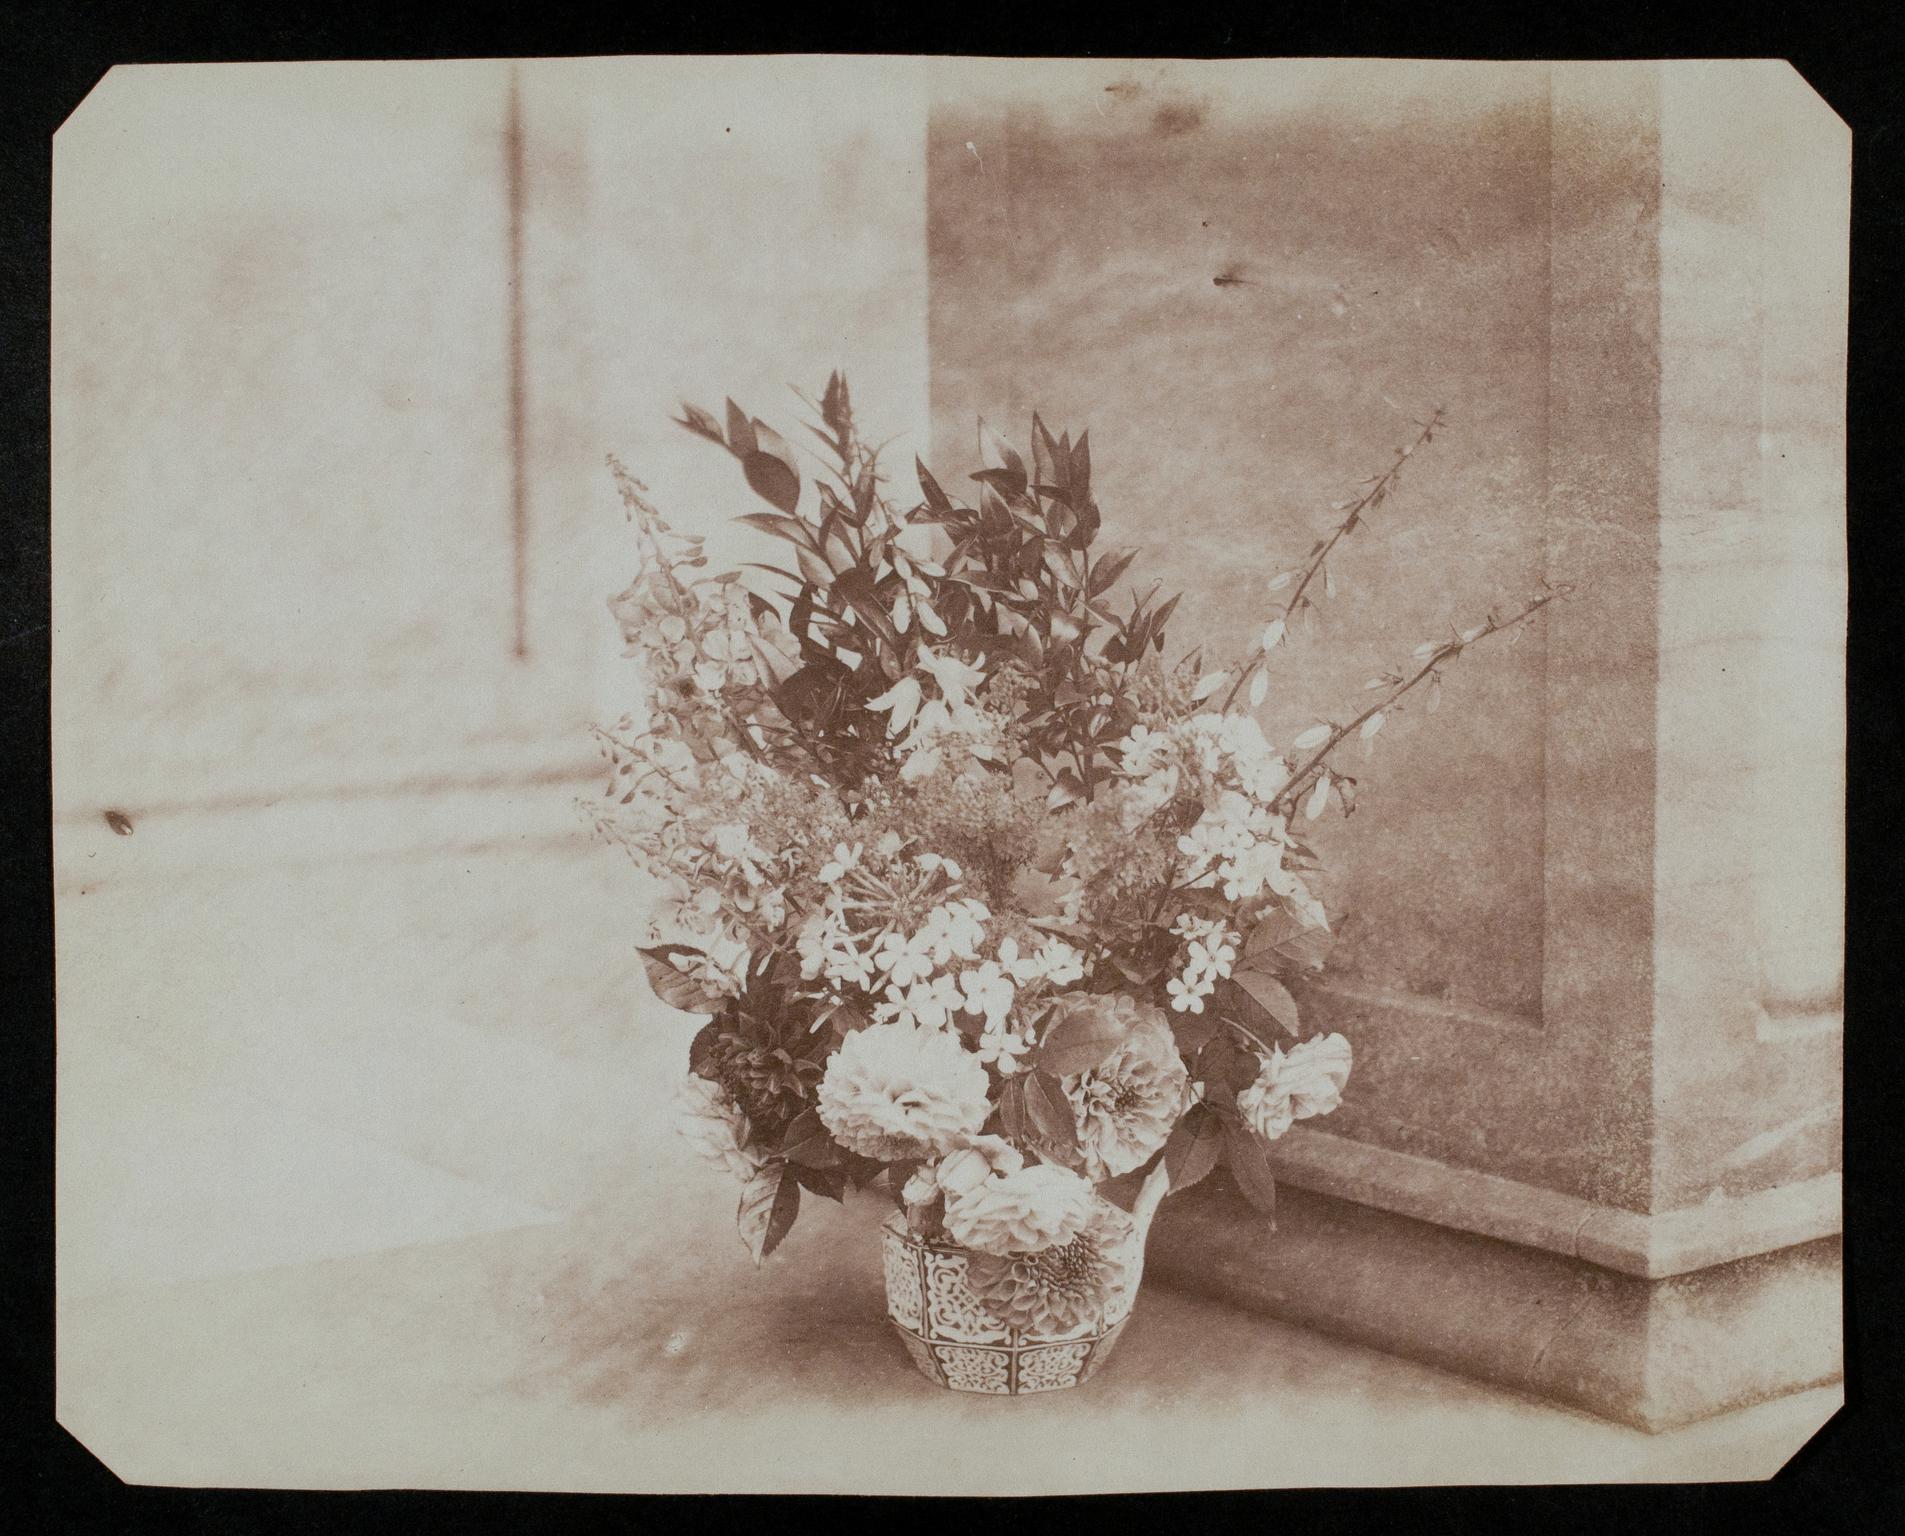 Vase of mixed flowers, photograph